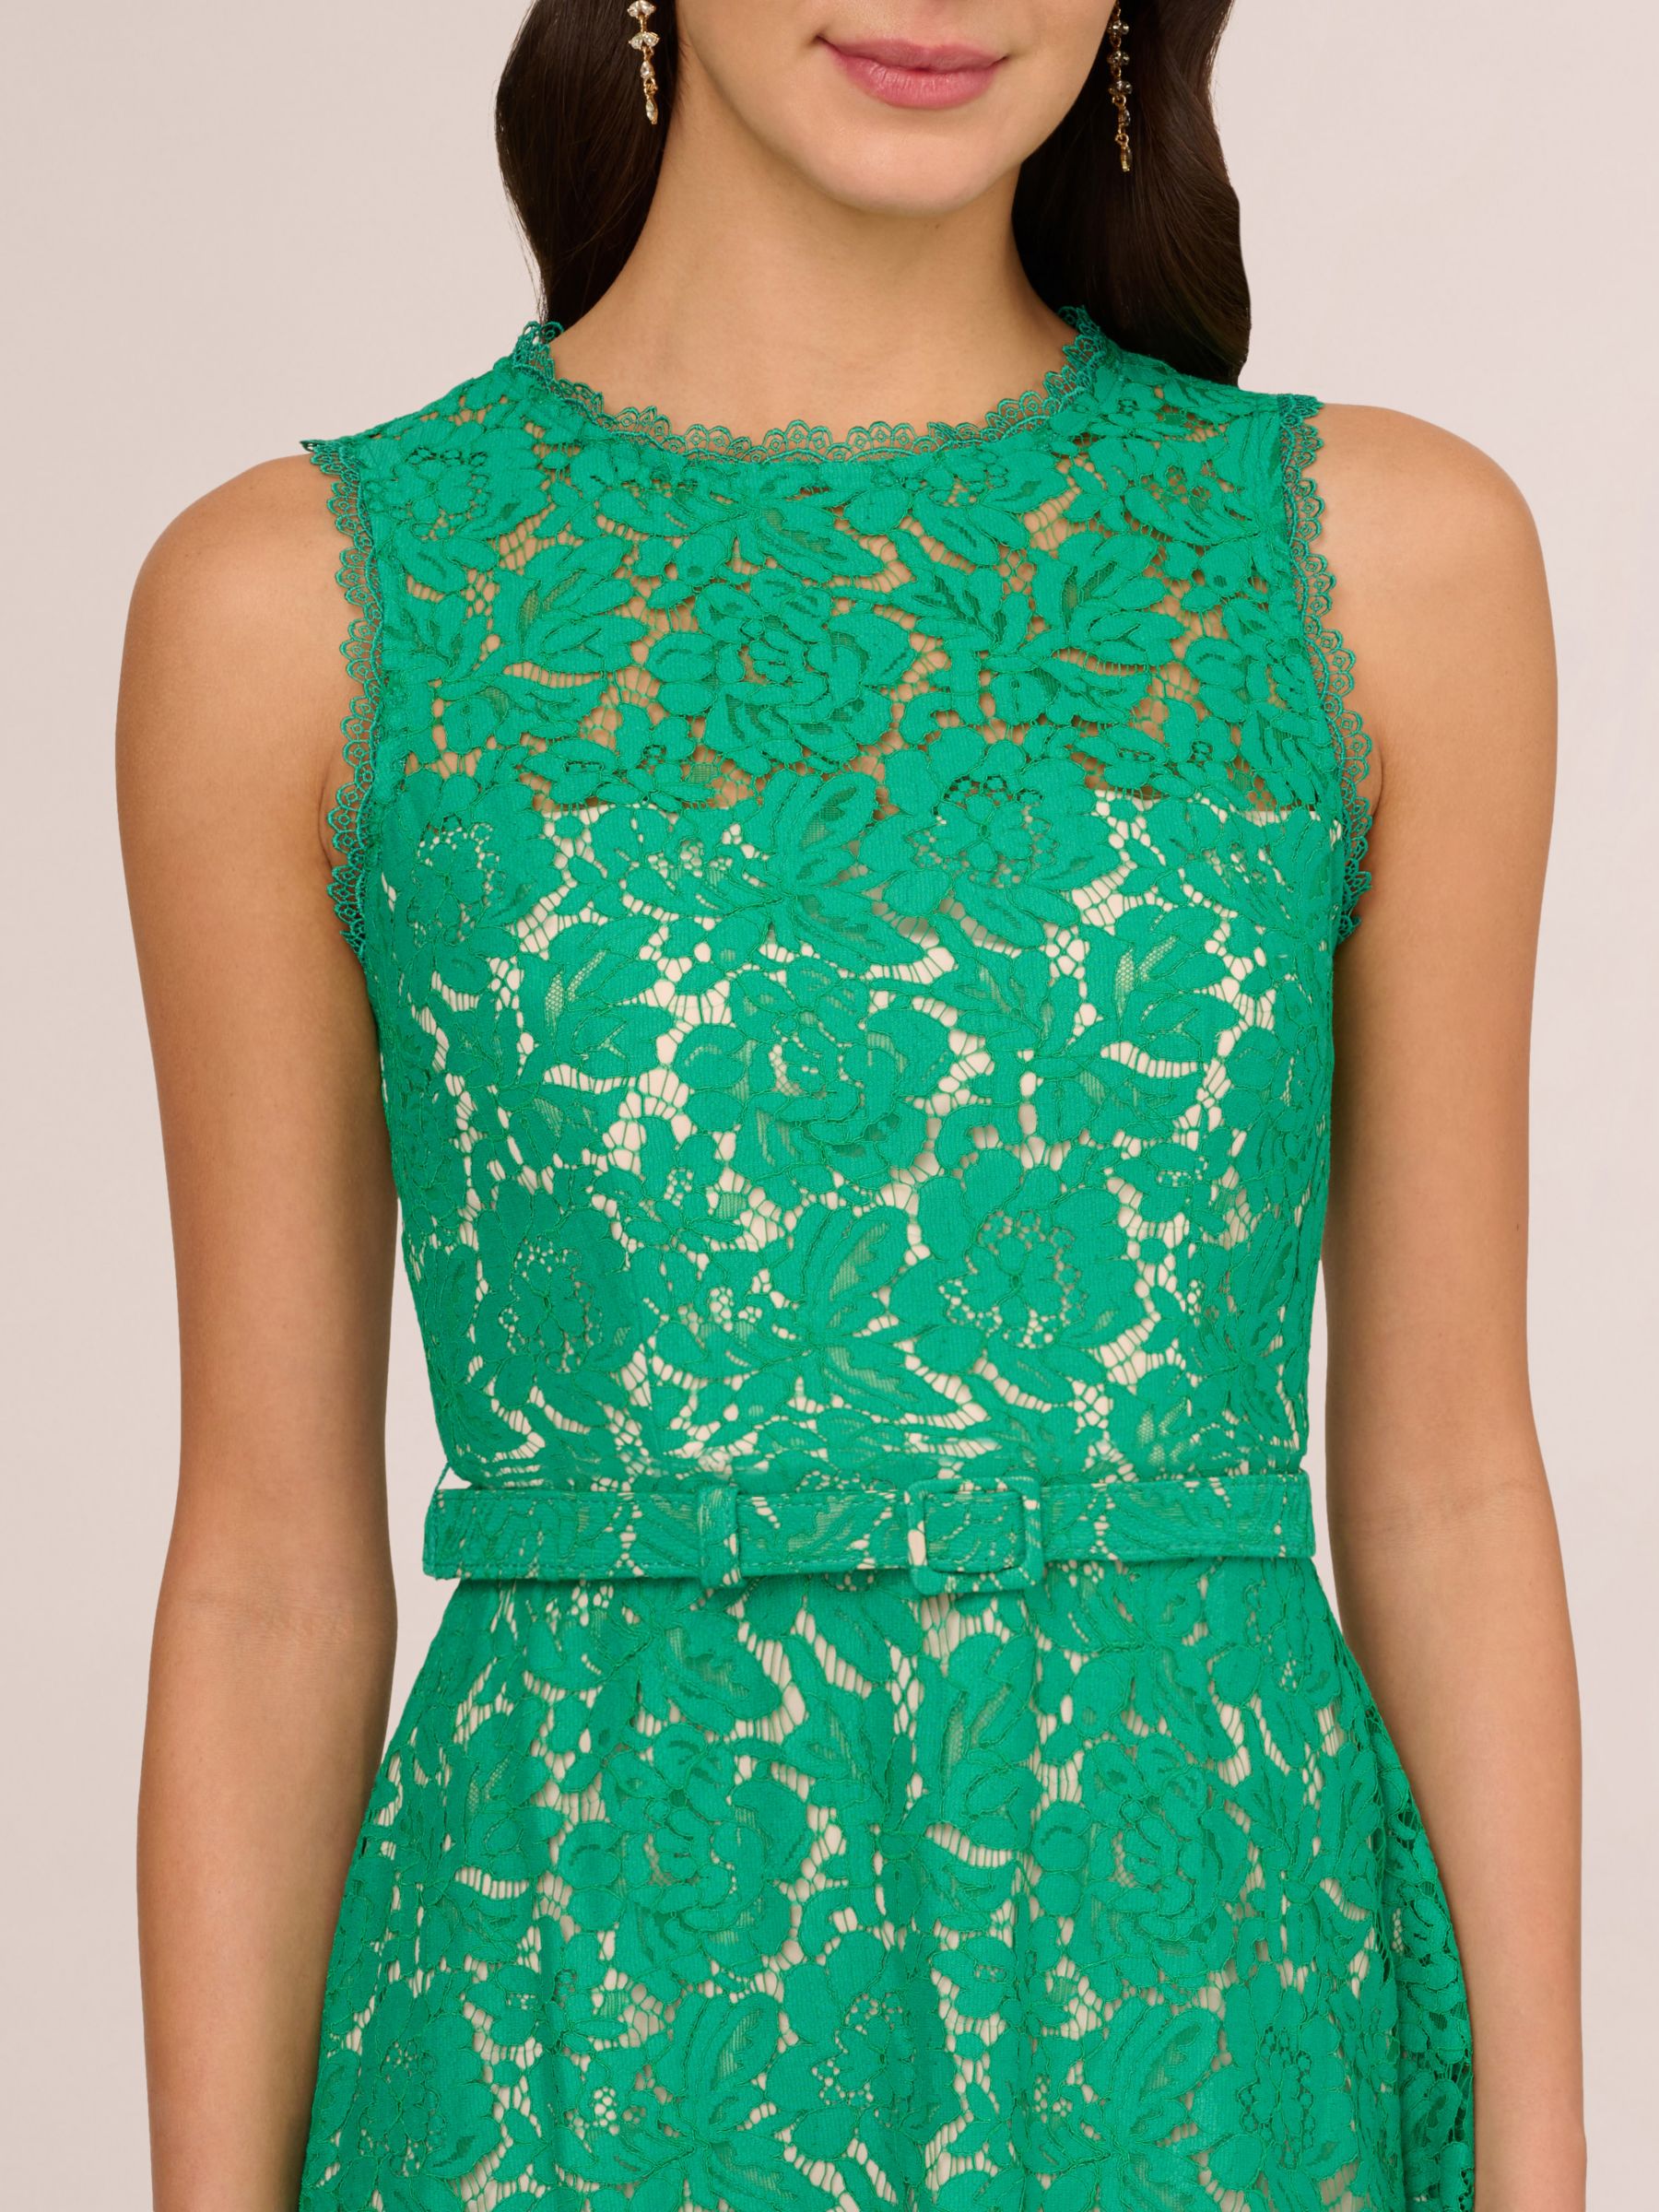 Buy Adrianna Papell Knit Lace Flared Dress, Botanic Green Online at johnlewis.com